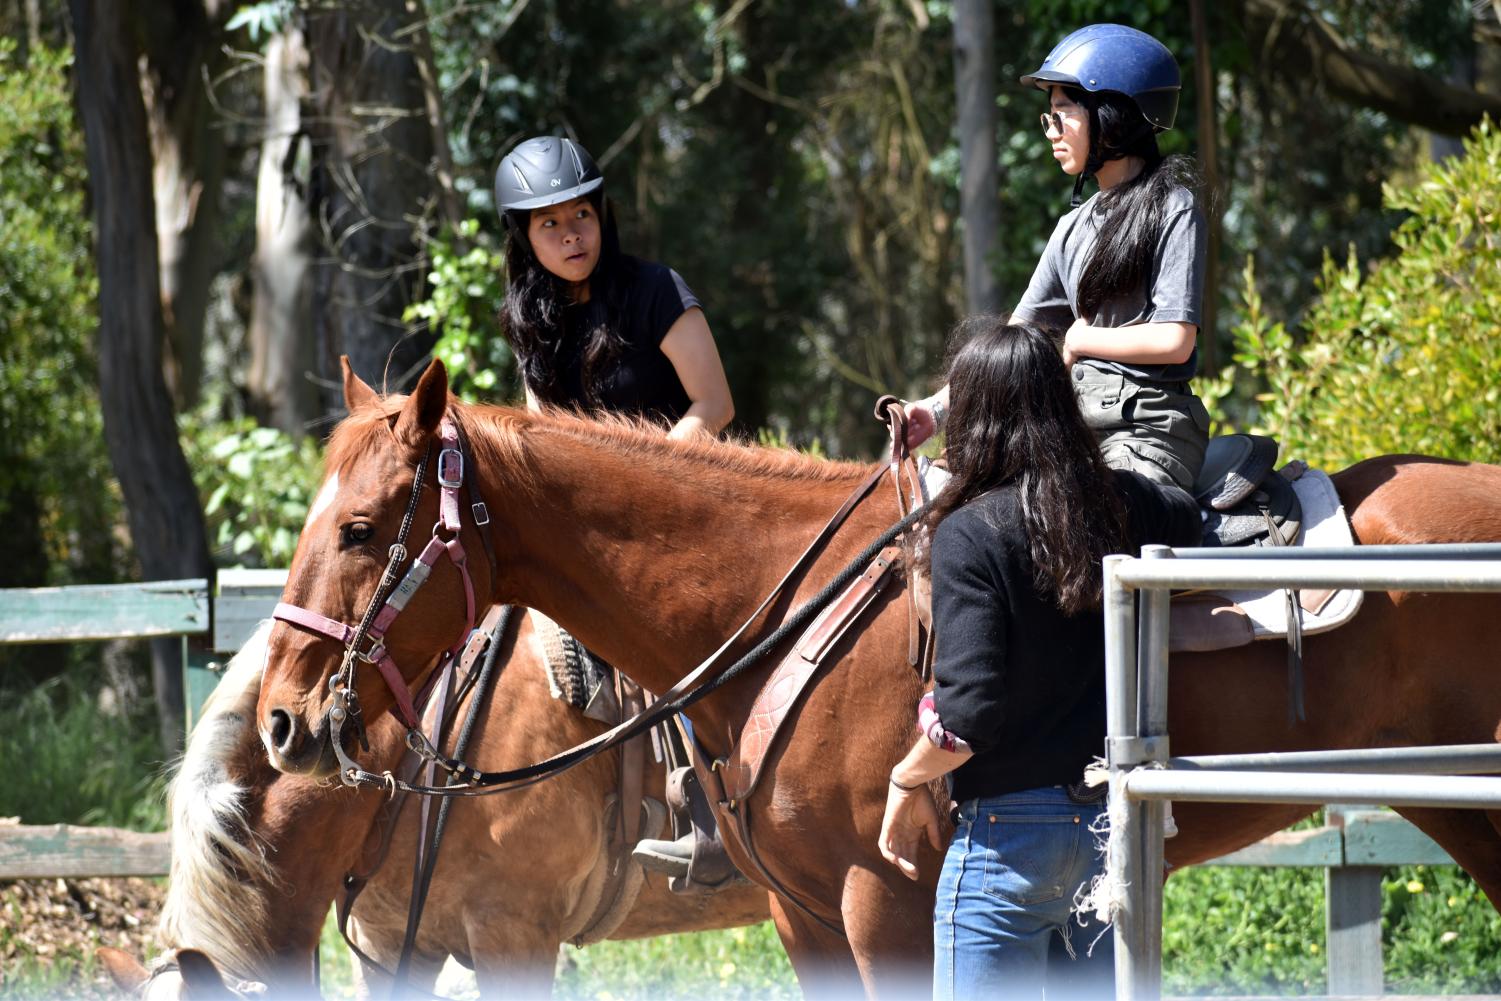 Claire helps get the next group ready for their ride at Chaparral Ranch at Golden Gate Park in San Francisco CA., Saturday, April 22, 2023. (Chris Myers / Xpress Magazine)